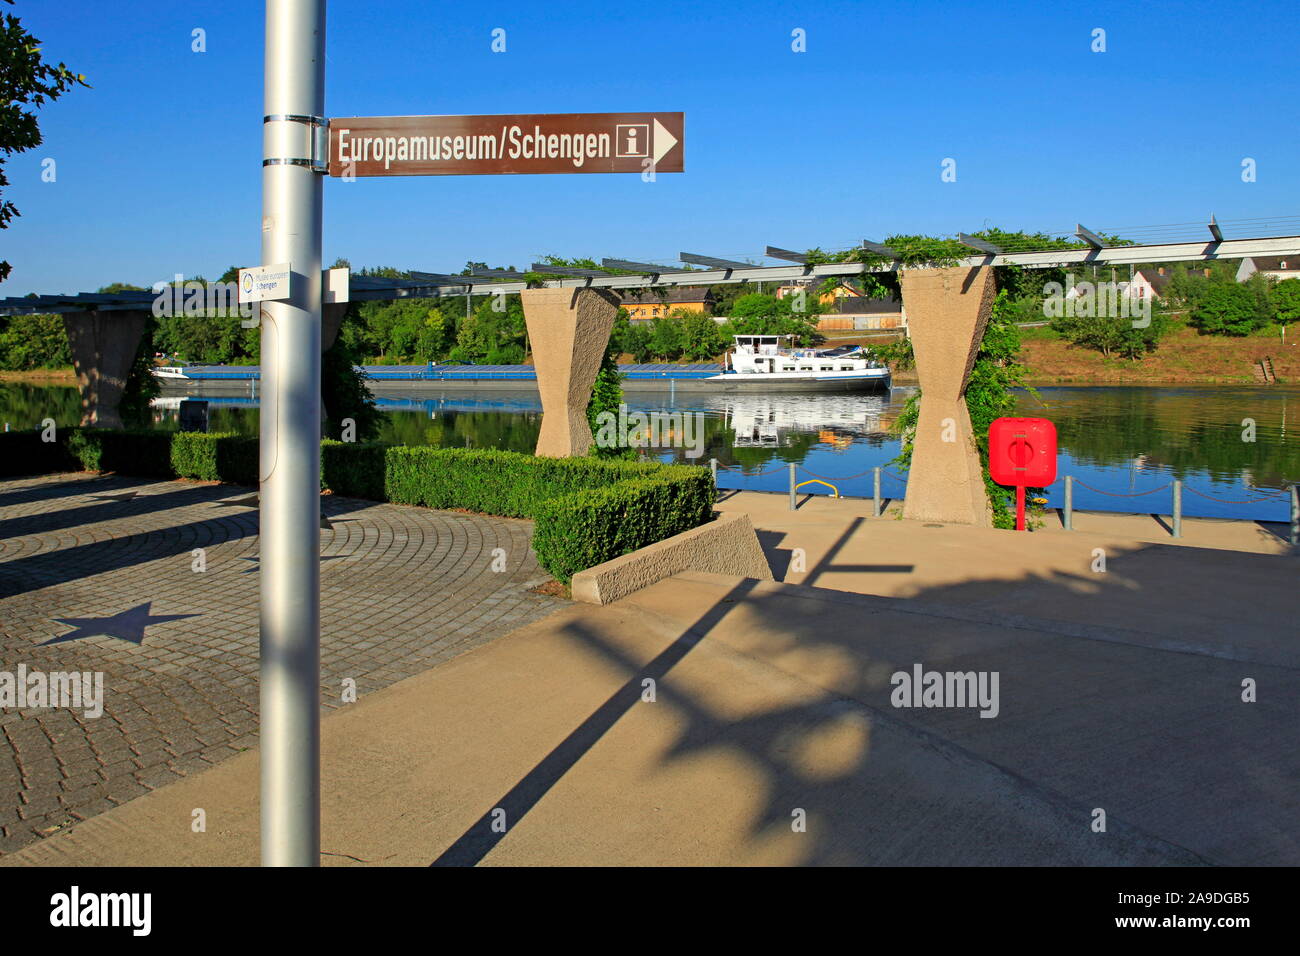 European Monument, Schengen, Canton Remich, Moselle Valley, Grand Duchy of Luxembourg Stock Photo